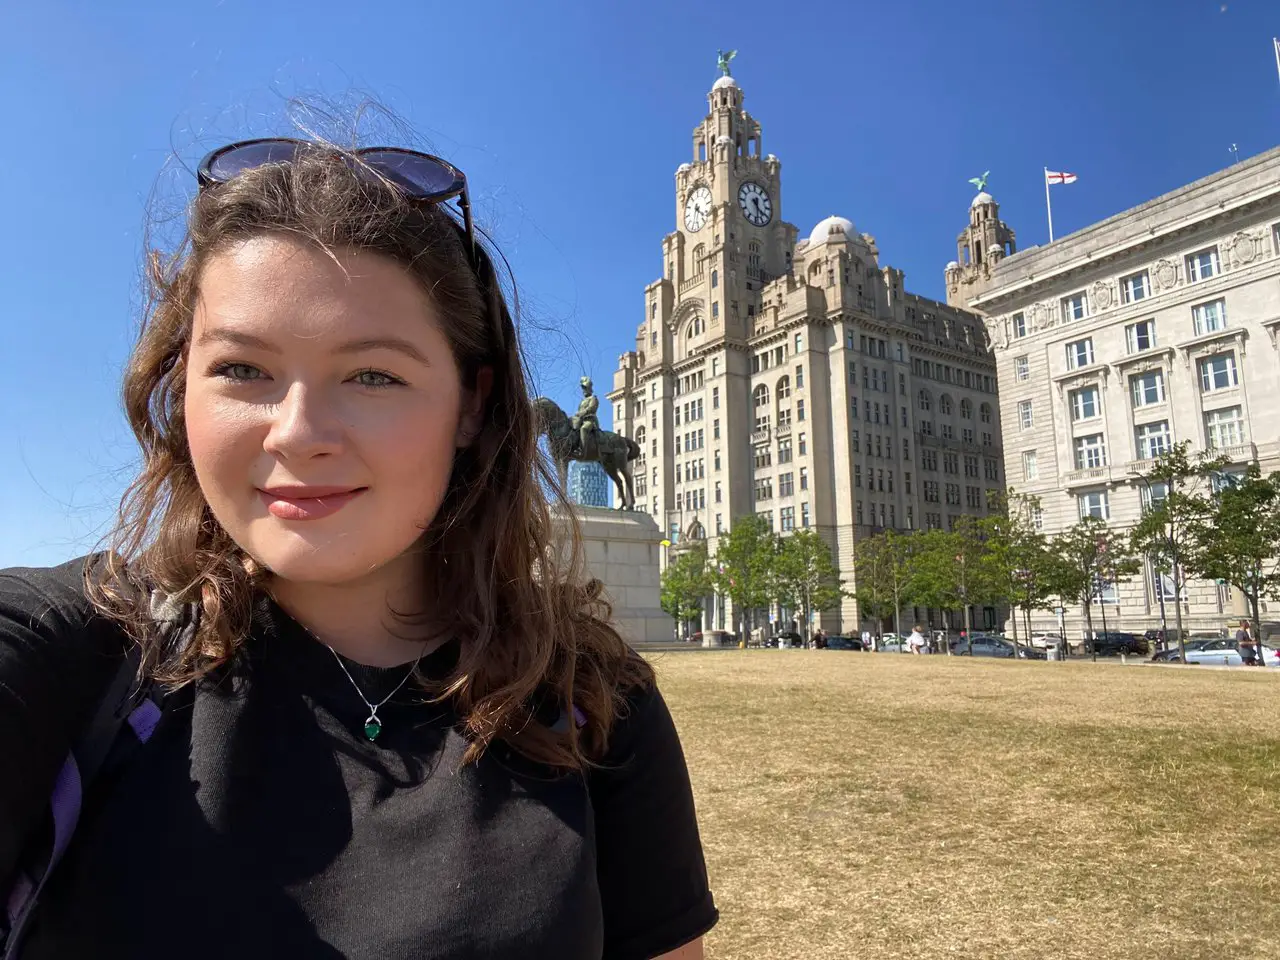 Selfie of Ella at Liver Building in Liverpool on a clear, sunny day